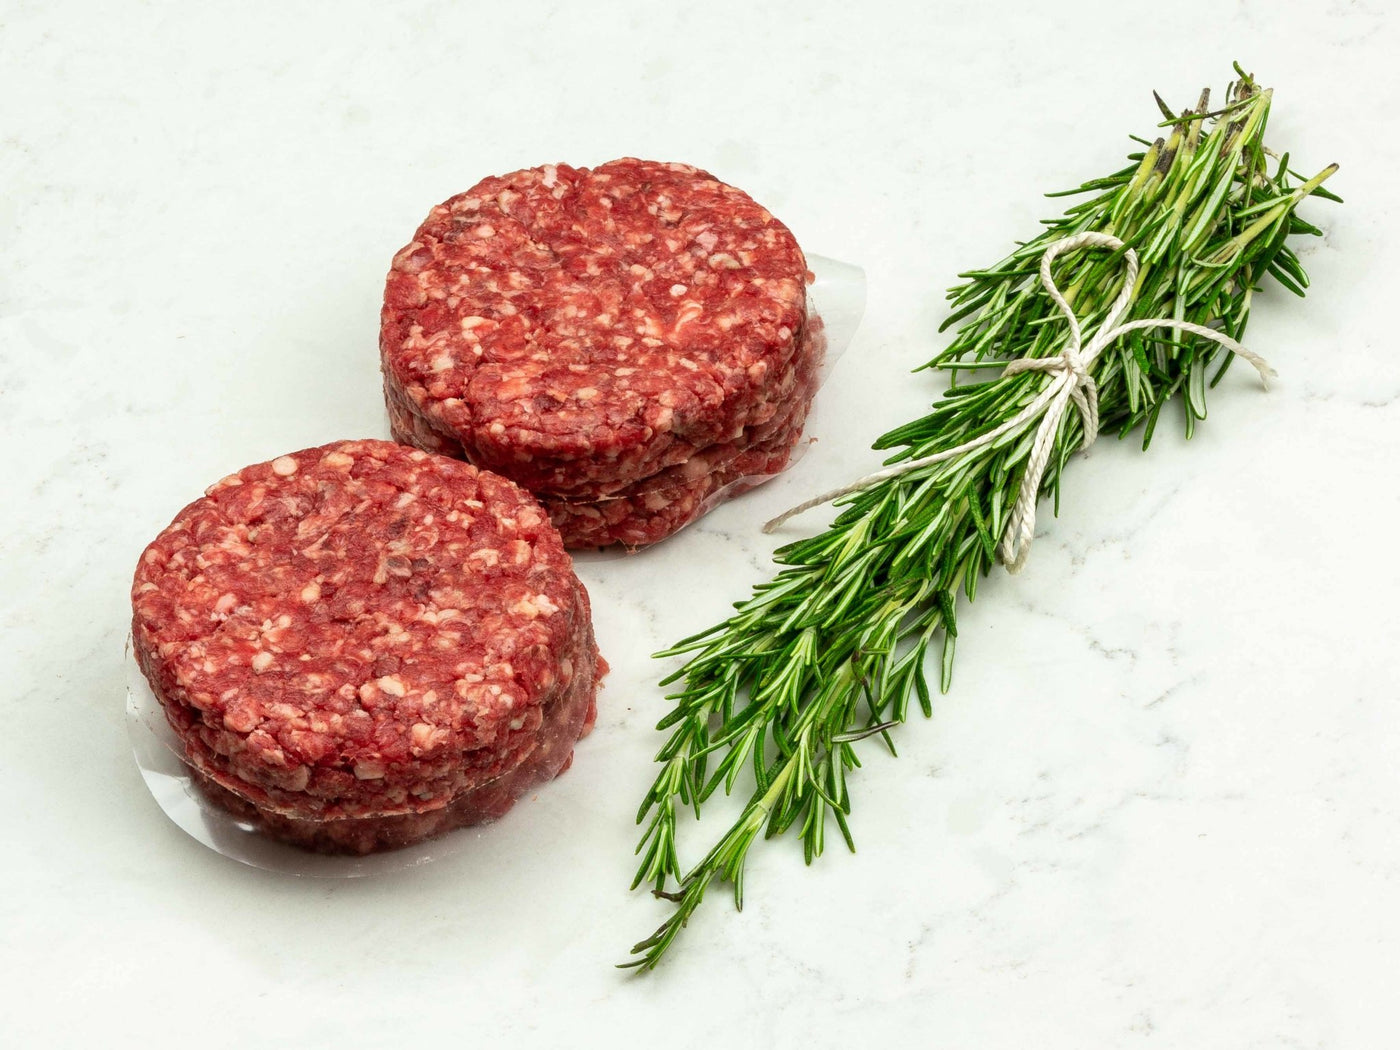 Dry-Aged Burger Mince (to make your own at home) - Beef - Thomas Joseph Butchery - Ethical Dry-Aged Meat The Best Steak UK Thomas Joseph Butchery